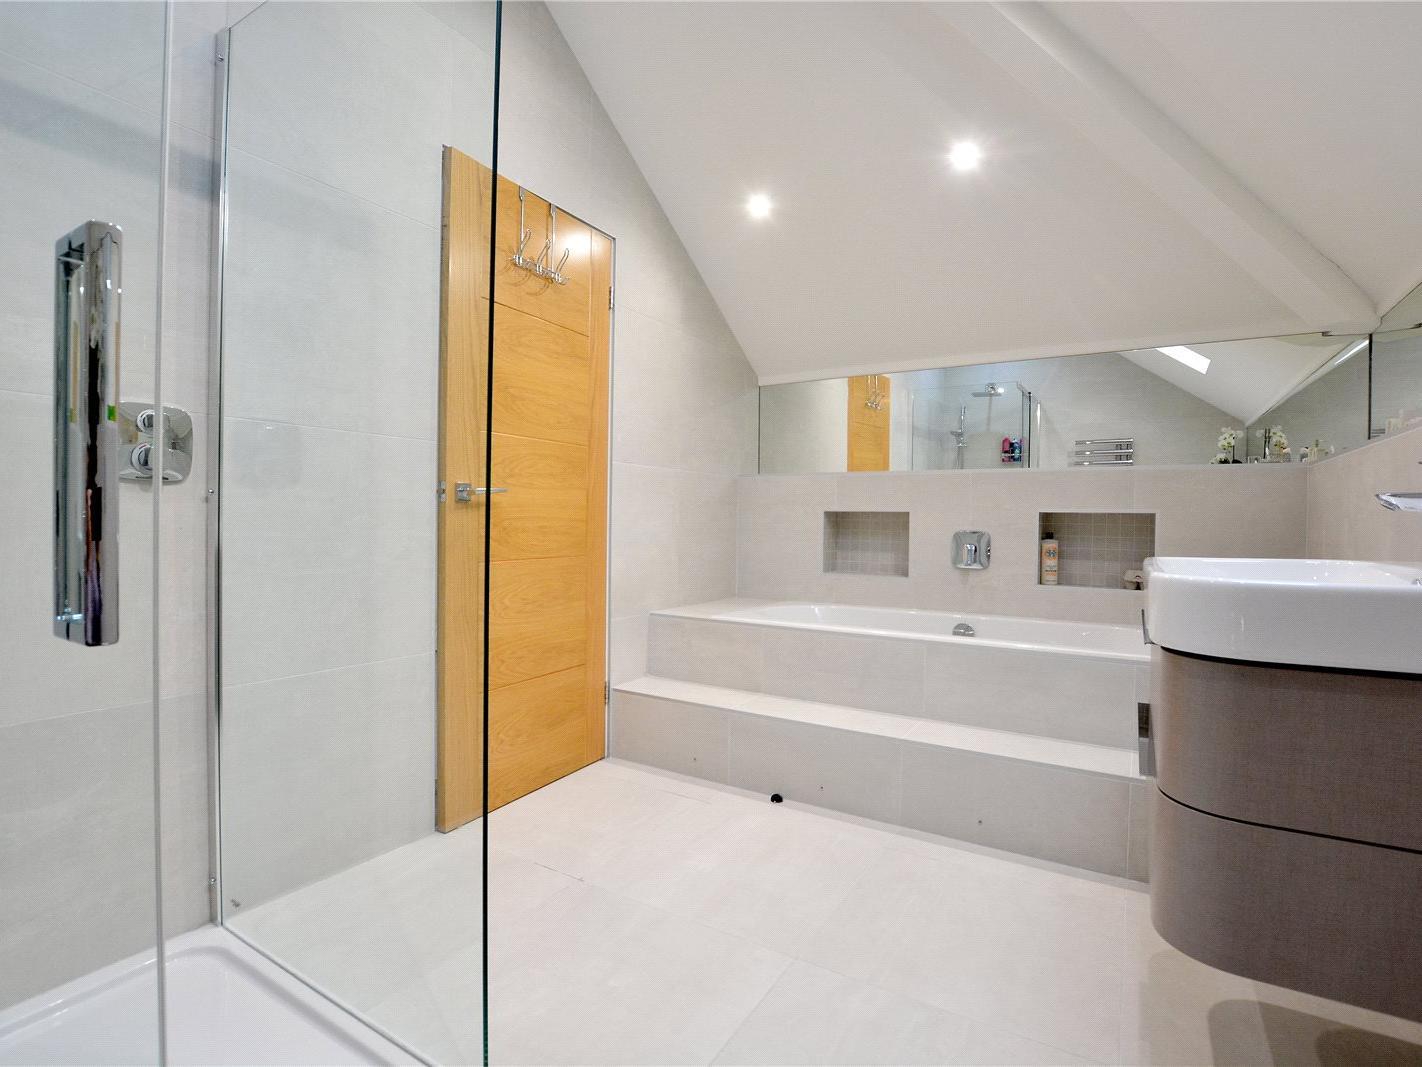 A modern five piece suite including bath, separate shower, bidet, and wash hand basin.